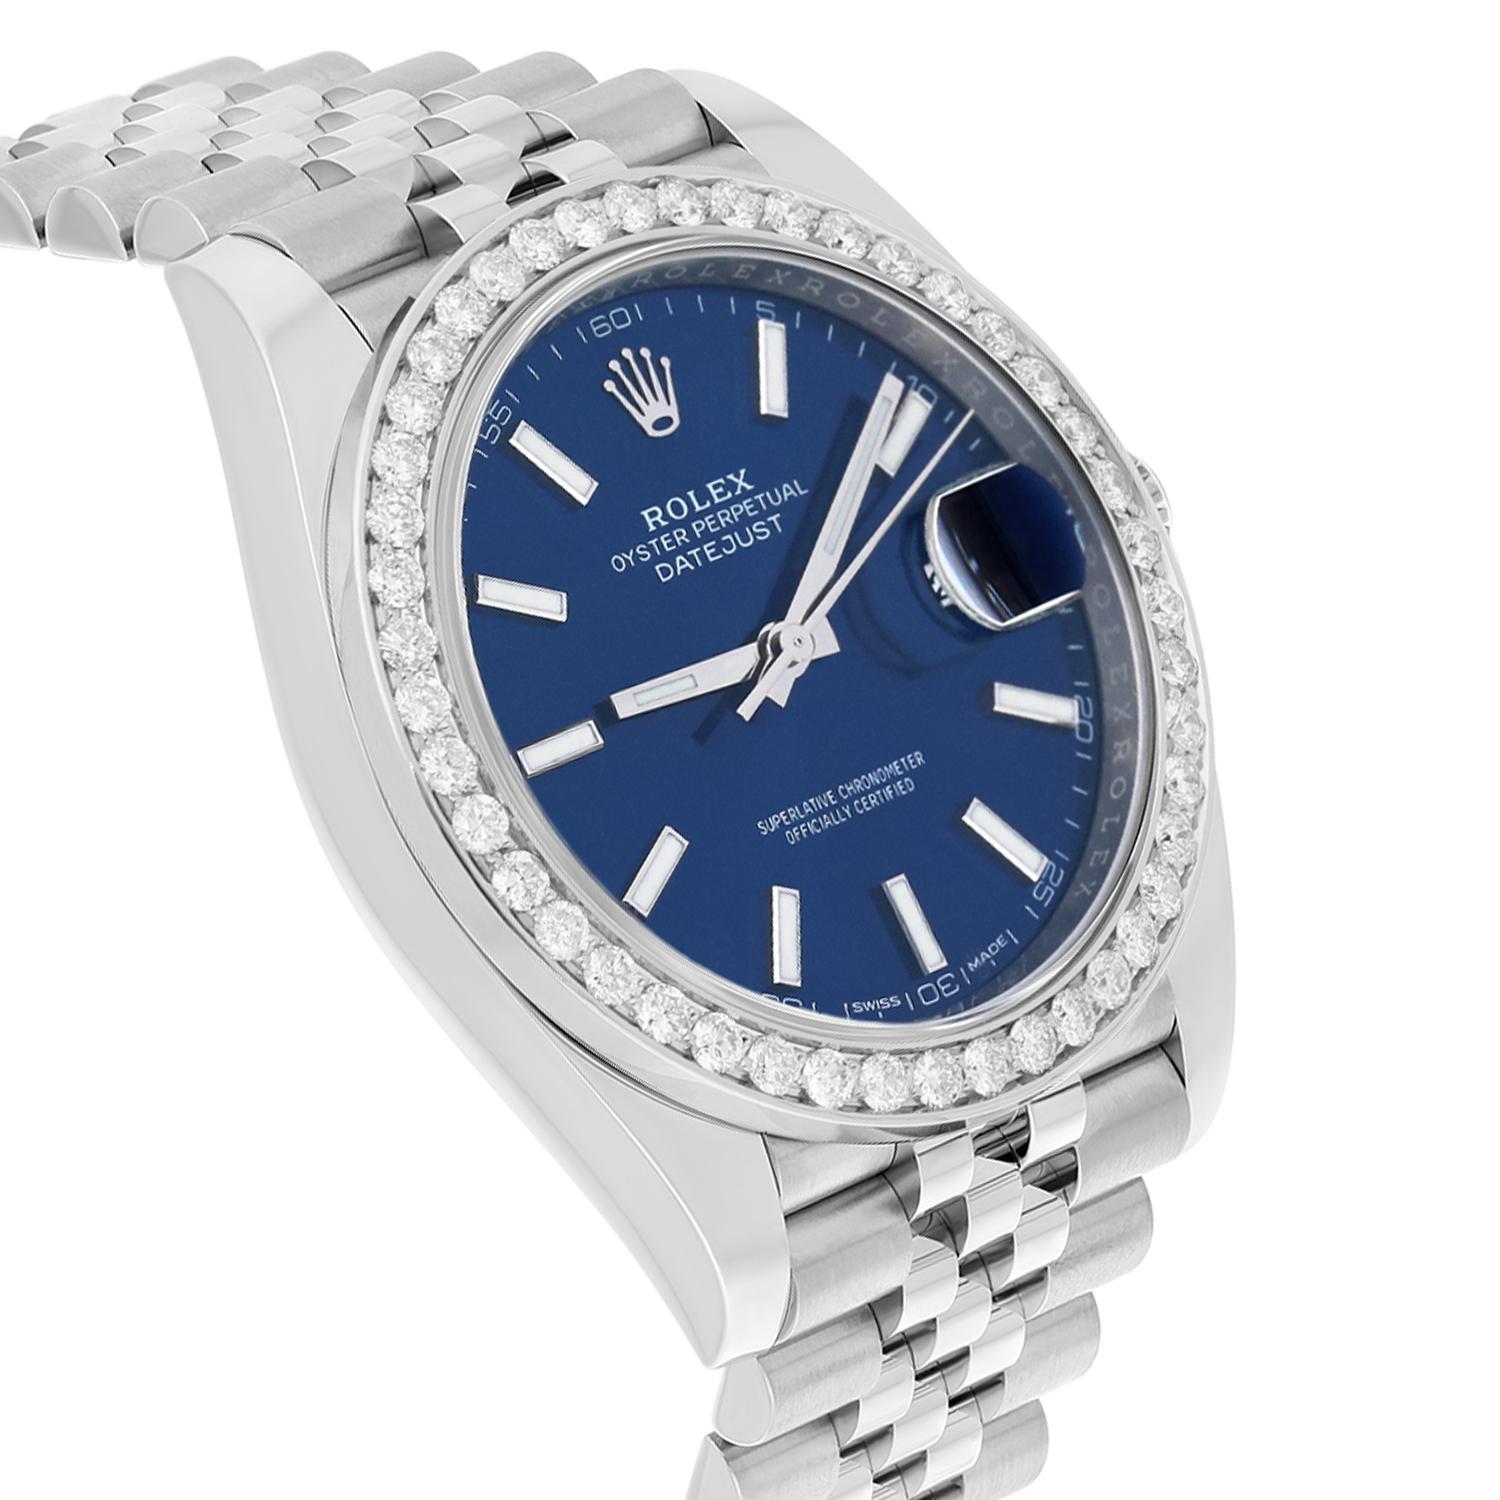 Round Cut Rolex Datejust 41 Steel Watch Blue Index Dial Diamonds Mens Jubilee Band 126300 For Sale